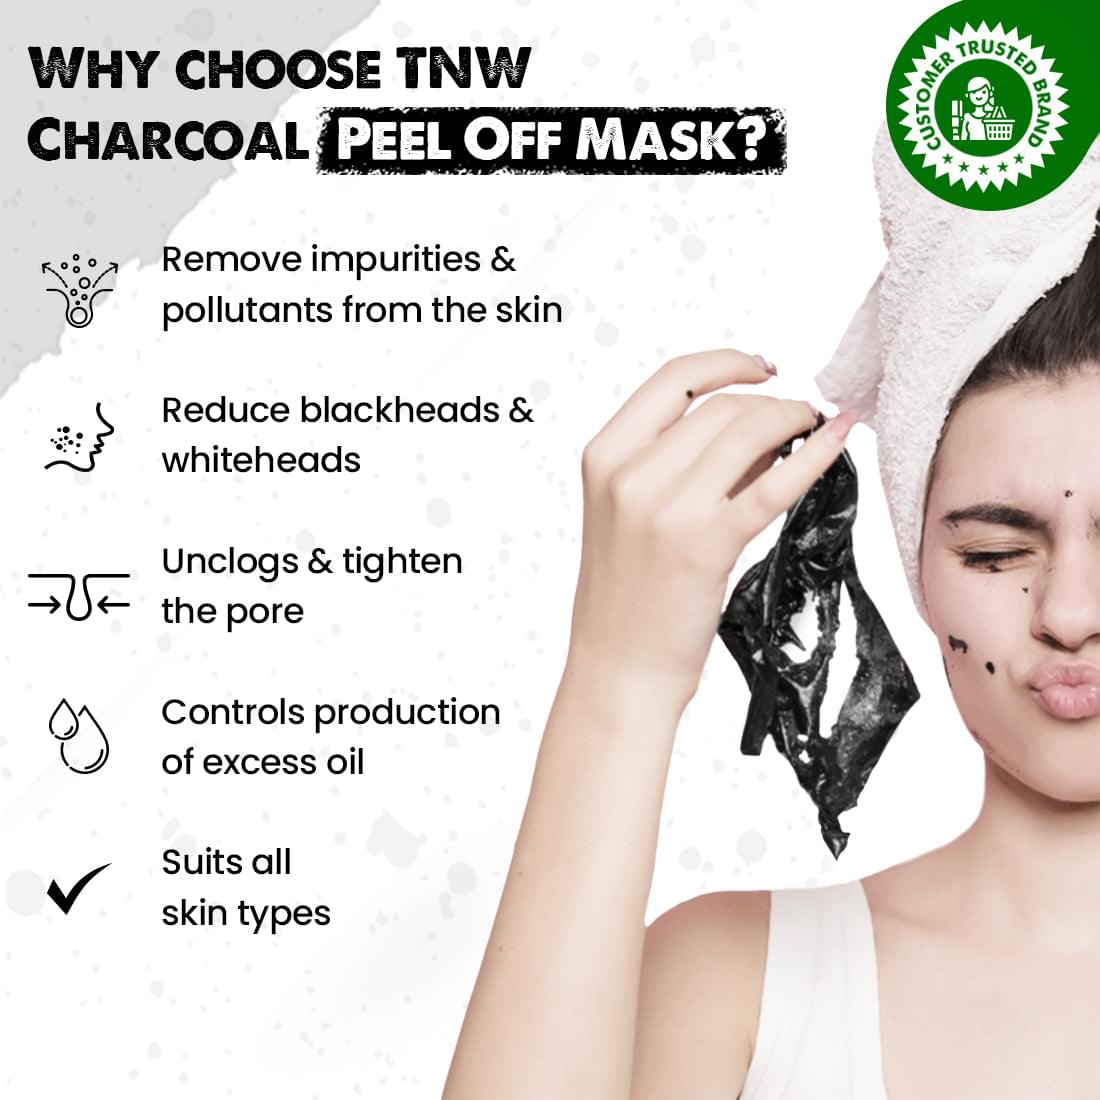 Charcoal Peel Off Mask for Blackheads and Removes Tan.